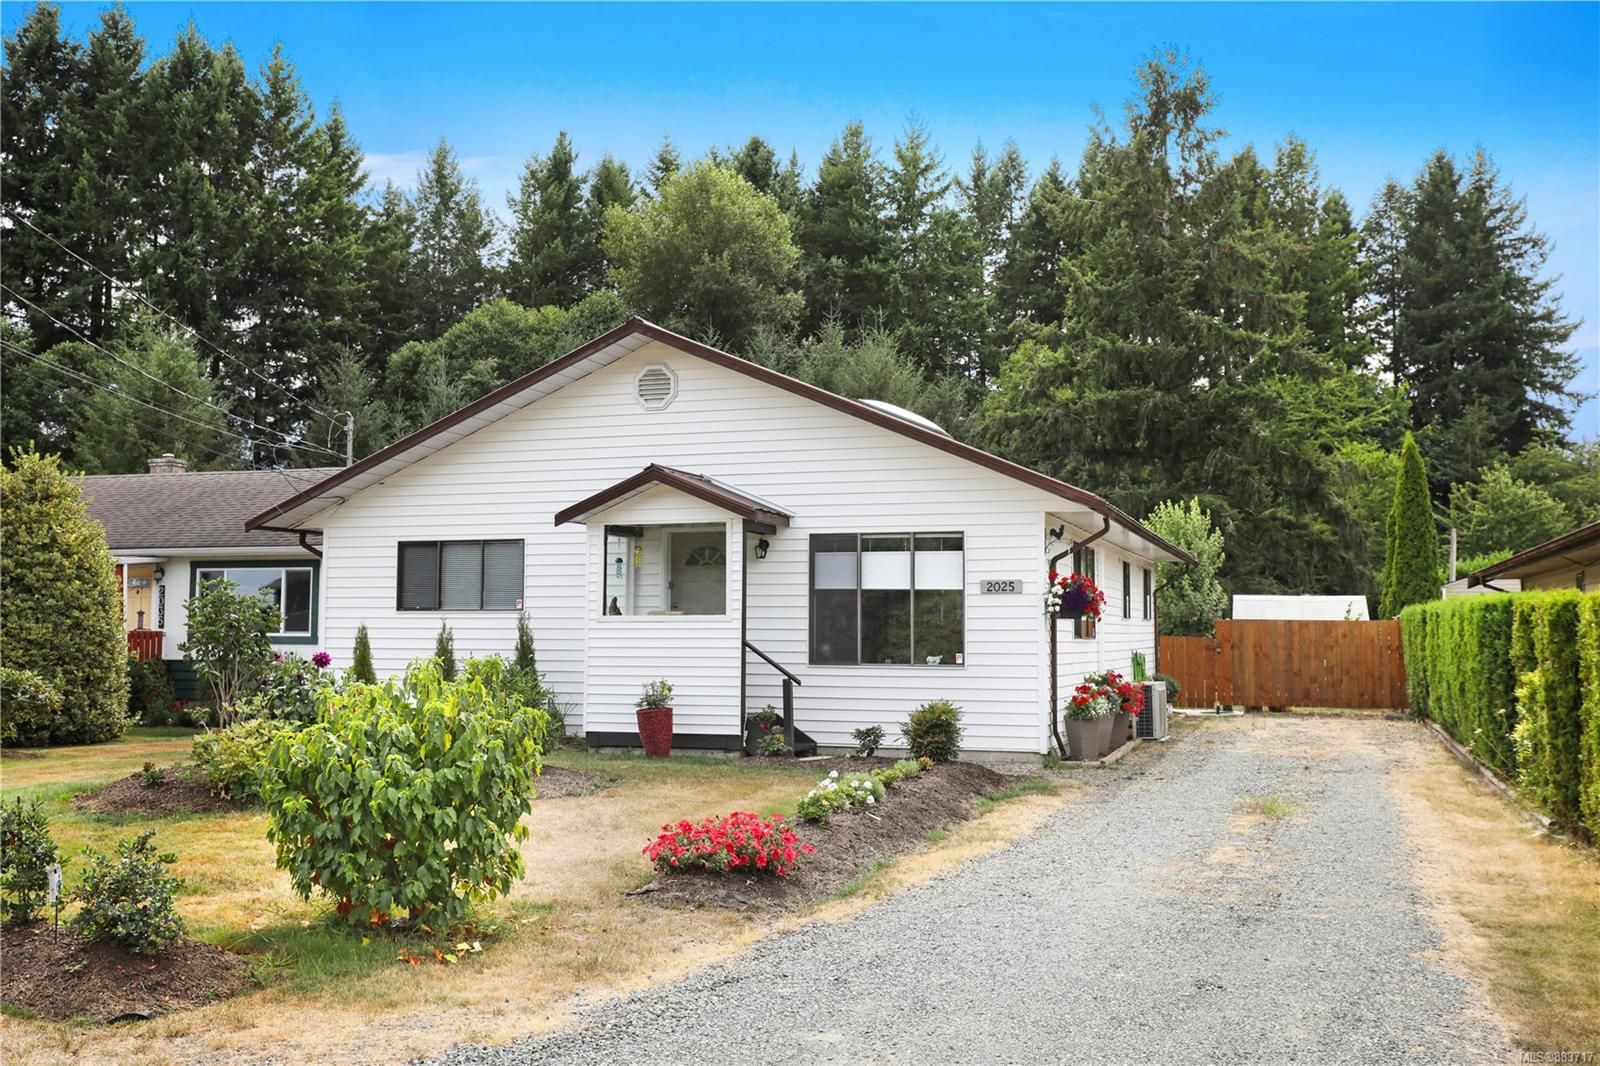 Main Photo: 2025 Cousins Ave in Courtenay: CV Courtenay City House for sale (Comox Valley)  : MLS®# 883717